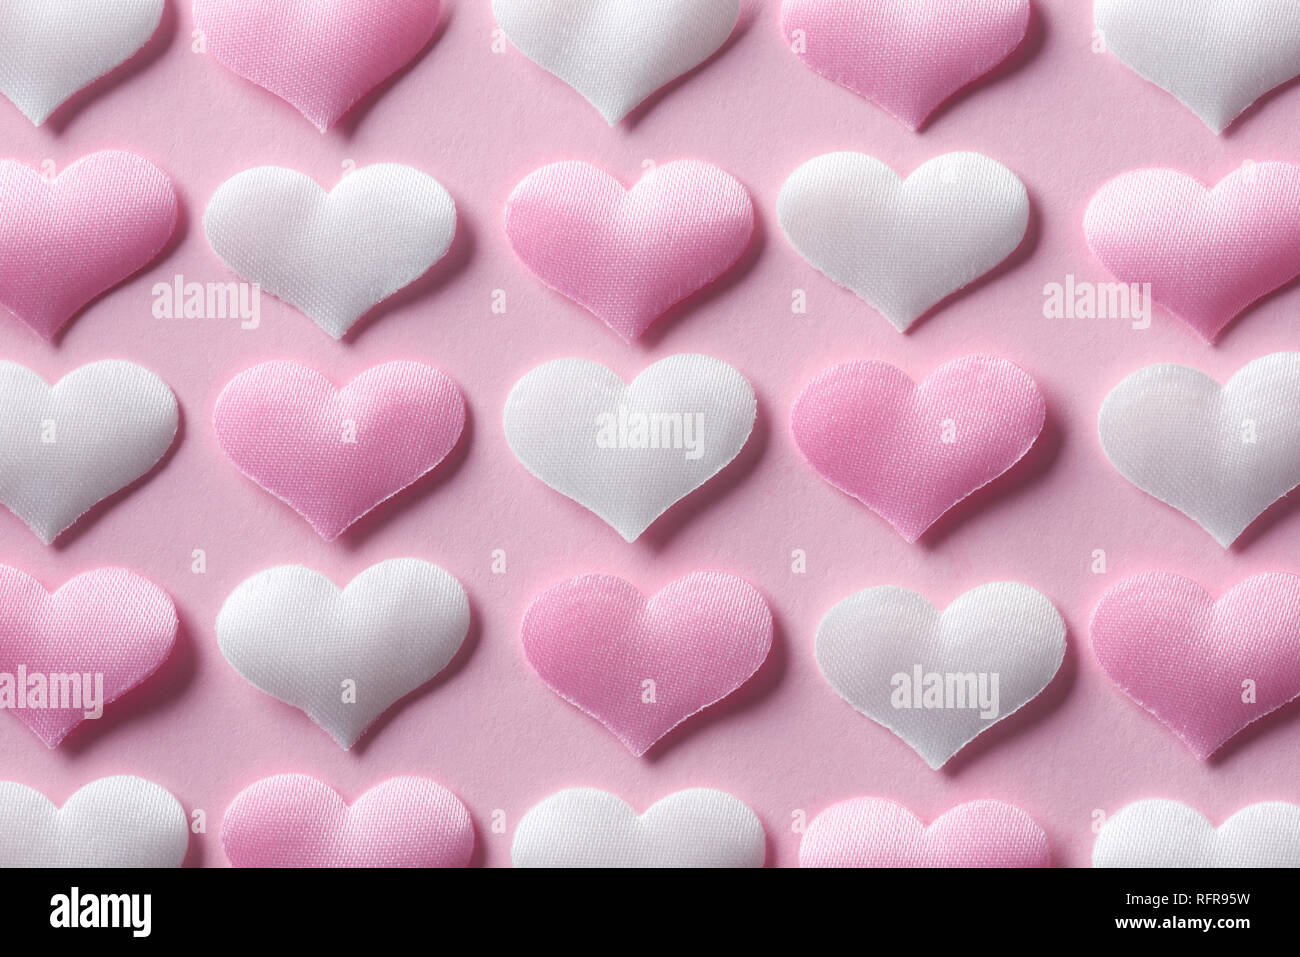 Valentines Background With Neon Pink Heart One Line On Dark Background  Bright Lighting Love Heart Valentines Day Vector Horizontal Banner Stock  Illustration - Download Image Now - iStock